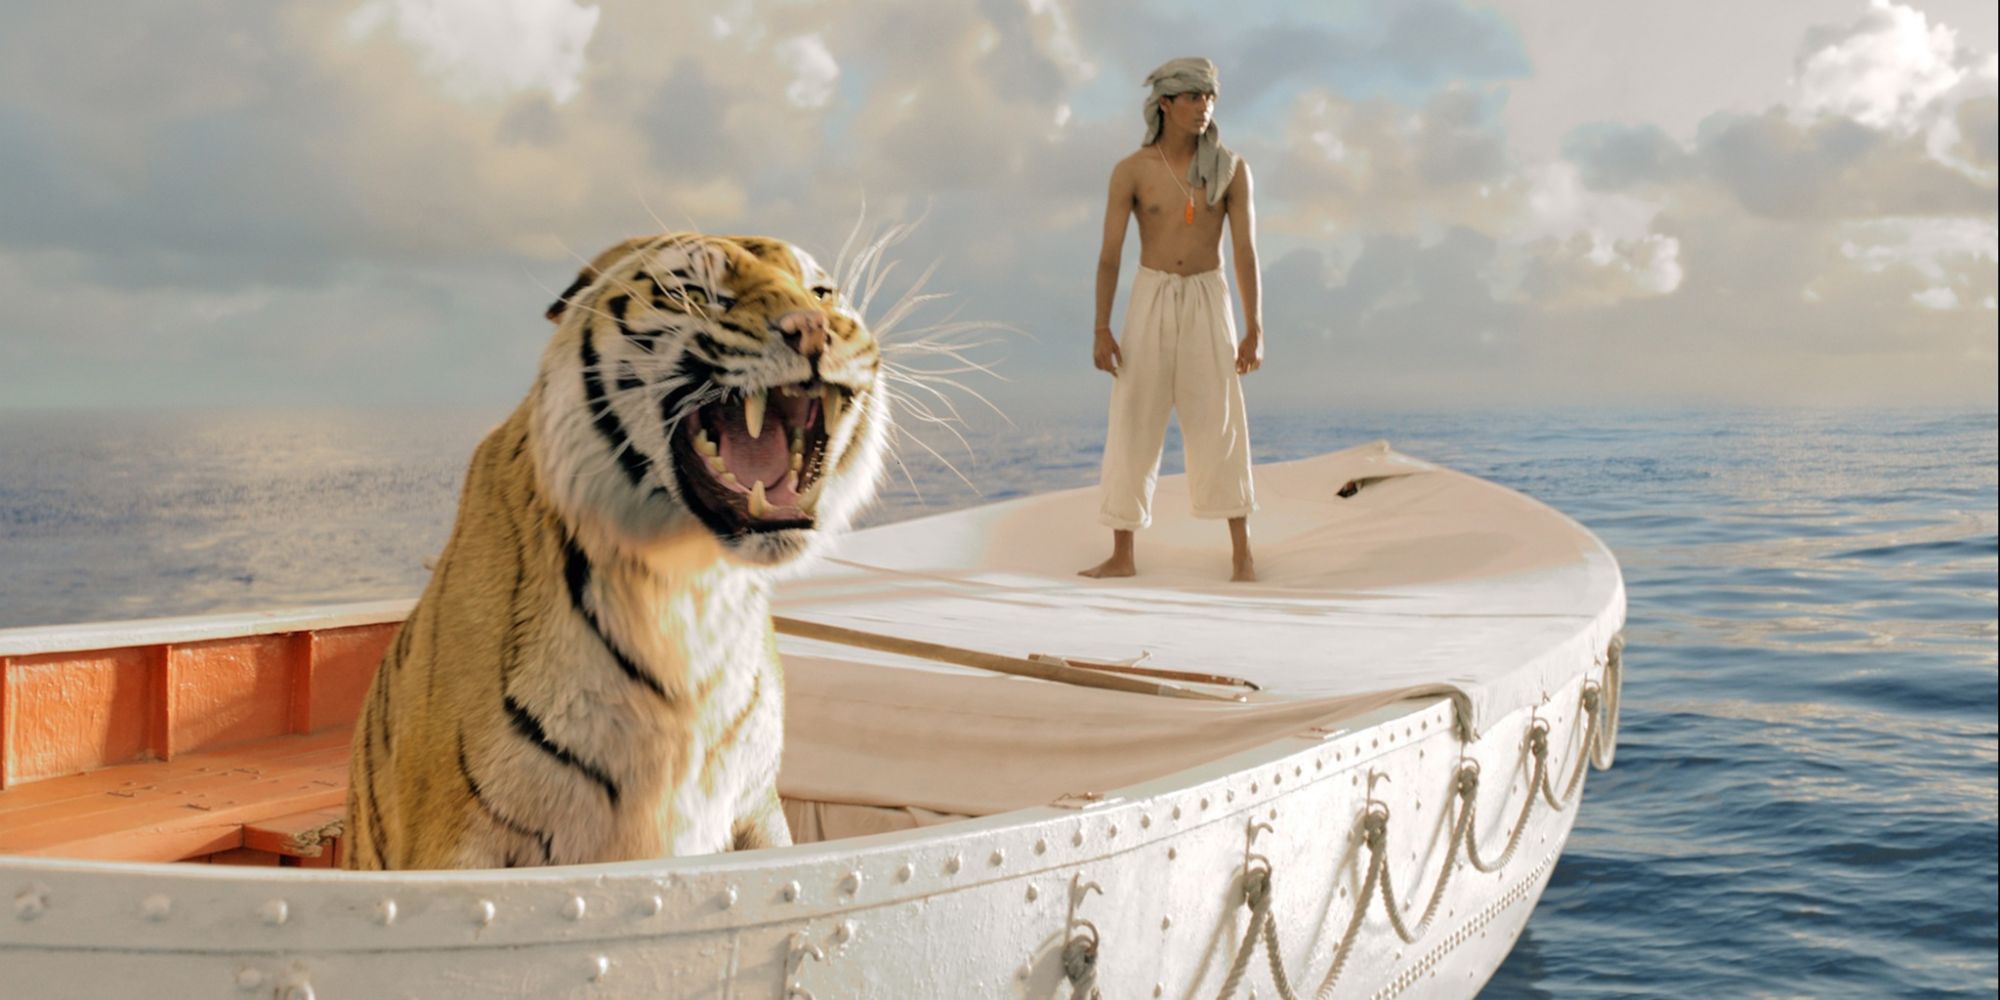 Pi (Suraj Sharma) looks over the boat with a tiger in Life of Pi (2012)